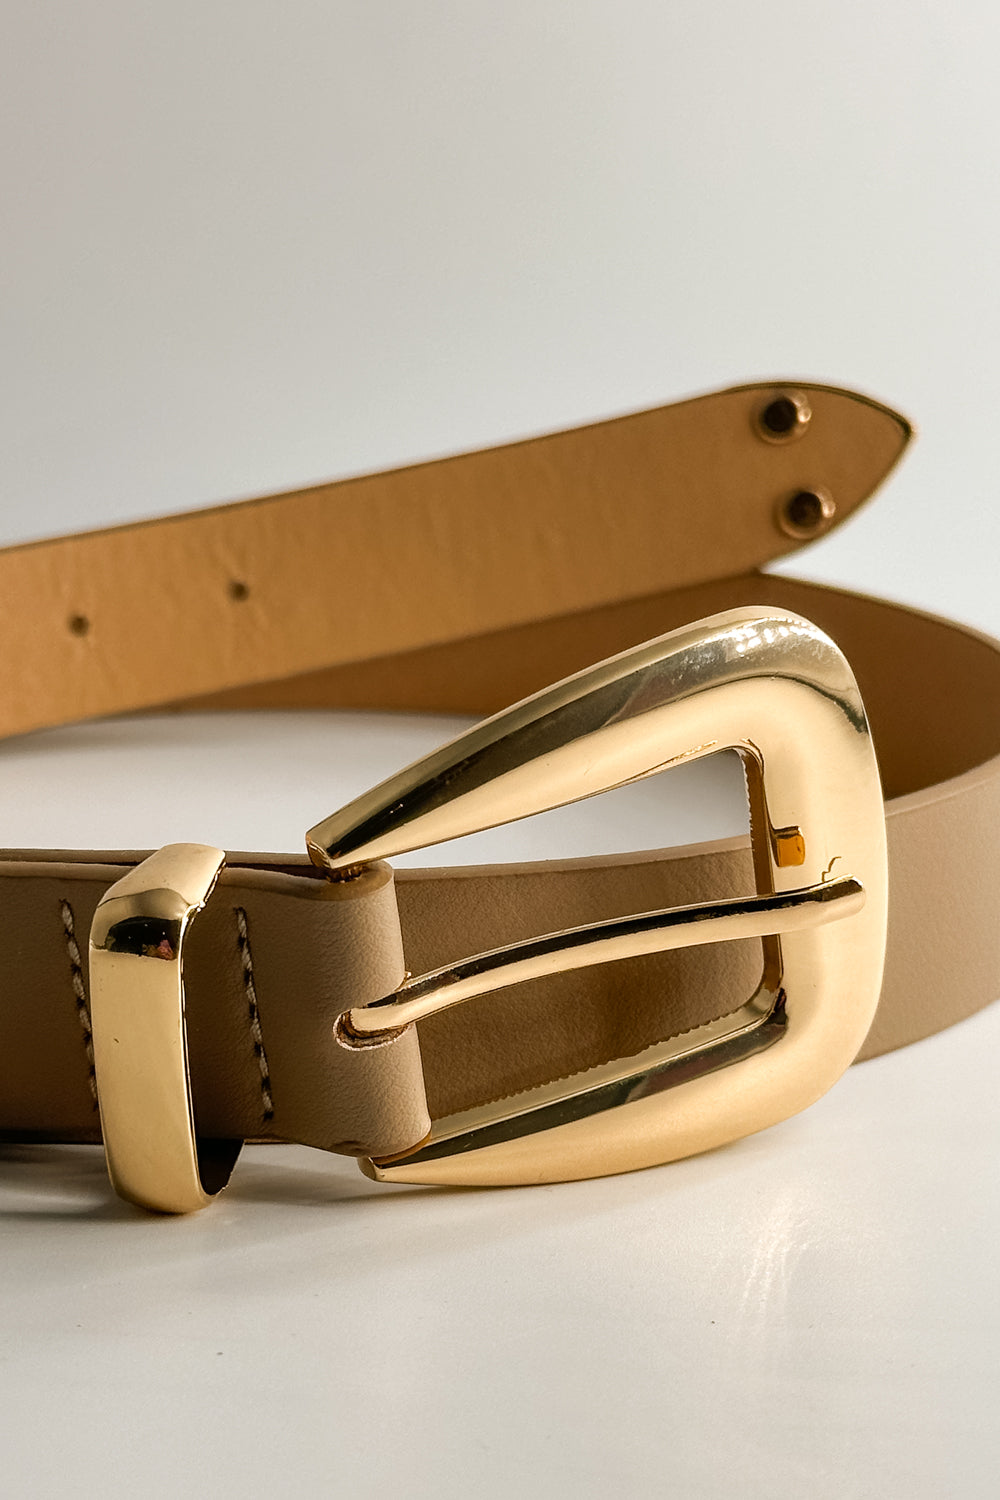 Close up view of the Lucia Taupe Western Adjustable Belt which features aupe Leather Fabric, Gold Adjustable Buckle and Gold Western Detail